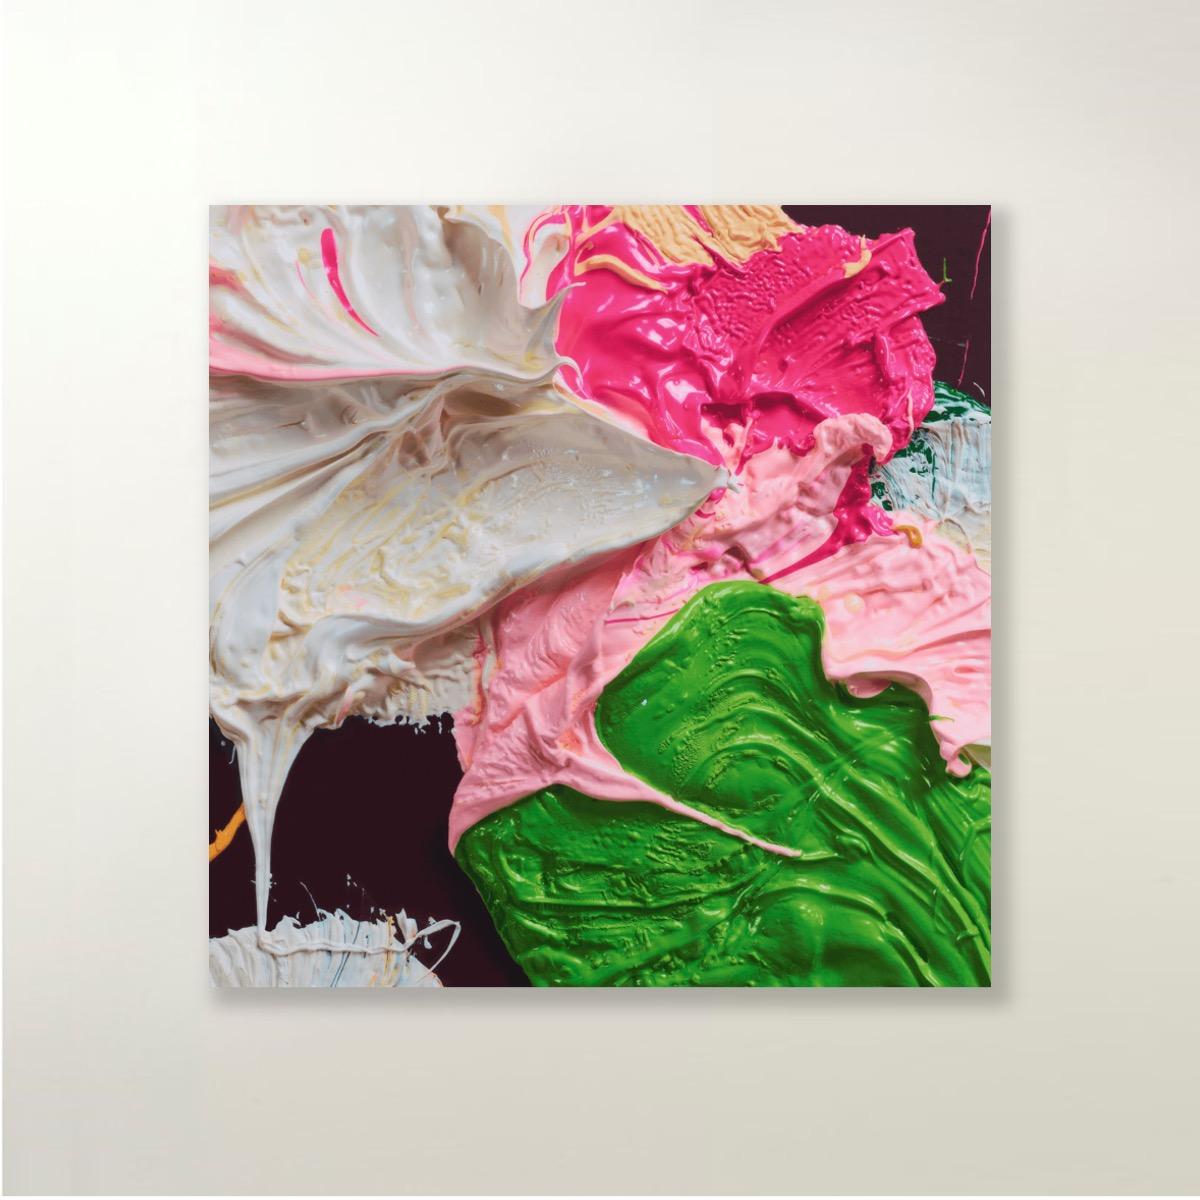 Damien Hirst Abstract Print - Forever (small) - Contemporary art, 21st Century, YBAs, Colorful, Giclée Print